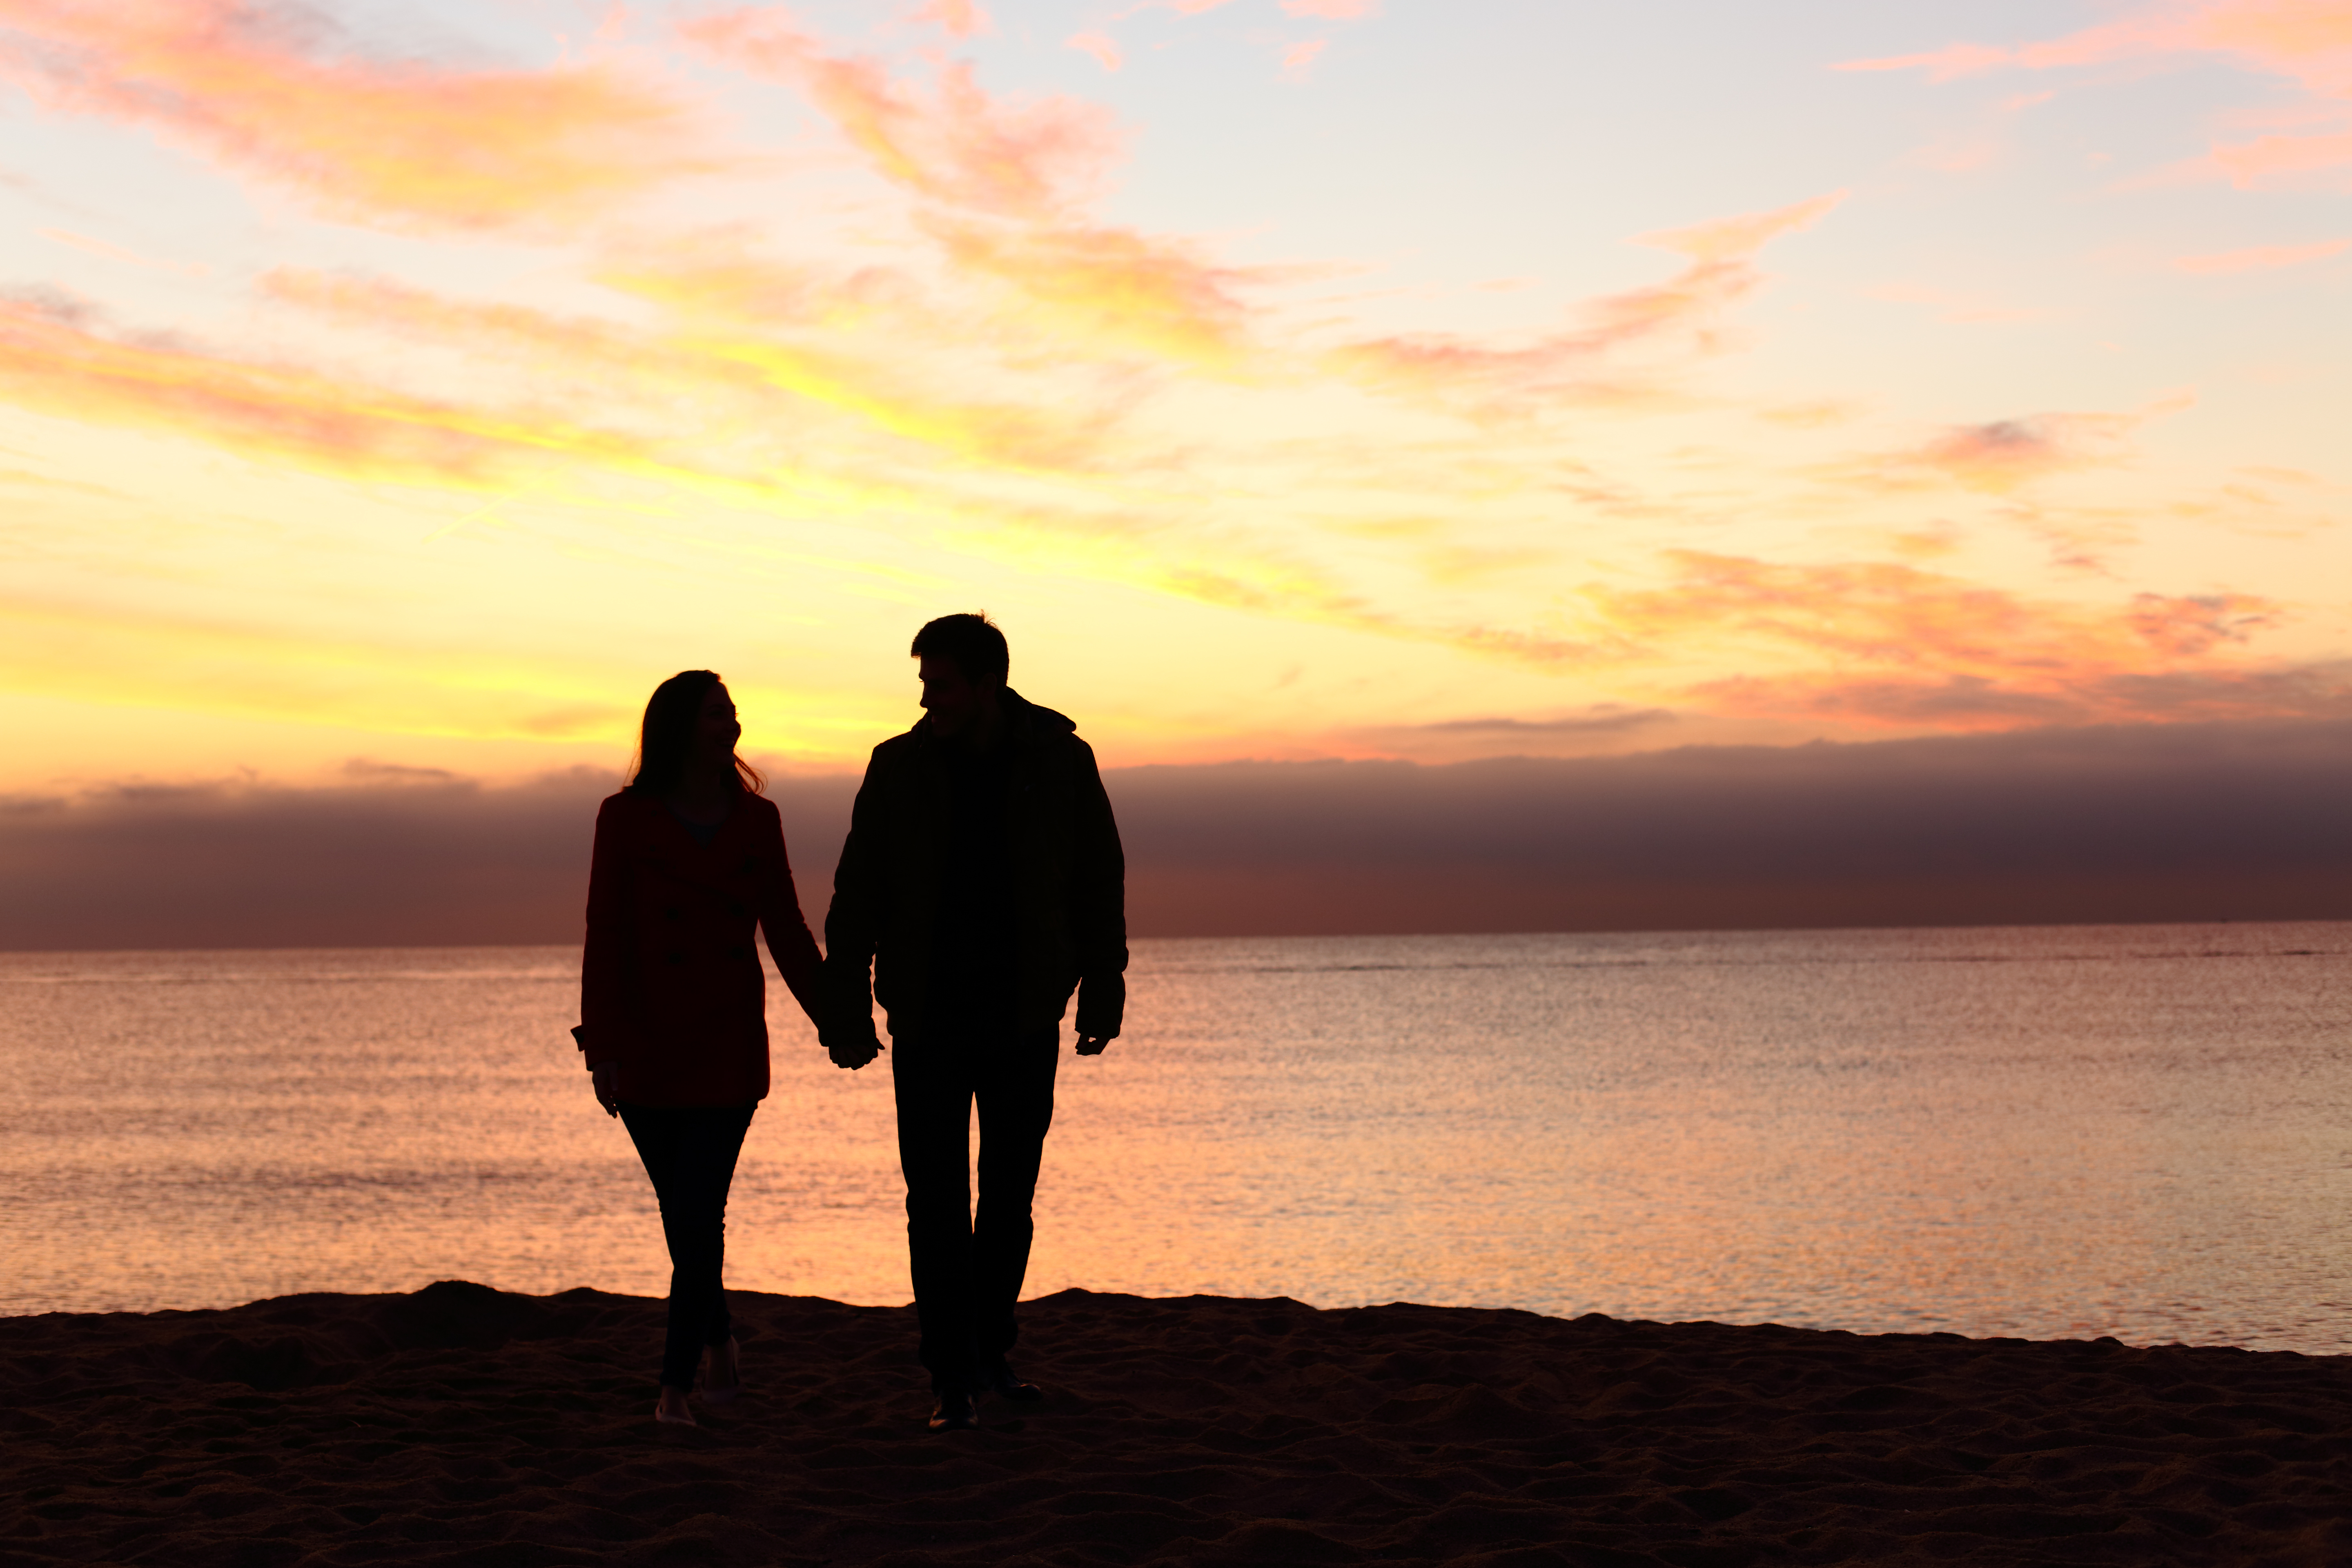 A silhouette of a couple watching the sunset on a beach | Source: Shutterstock